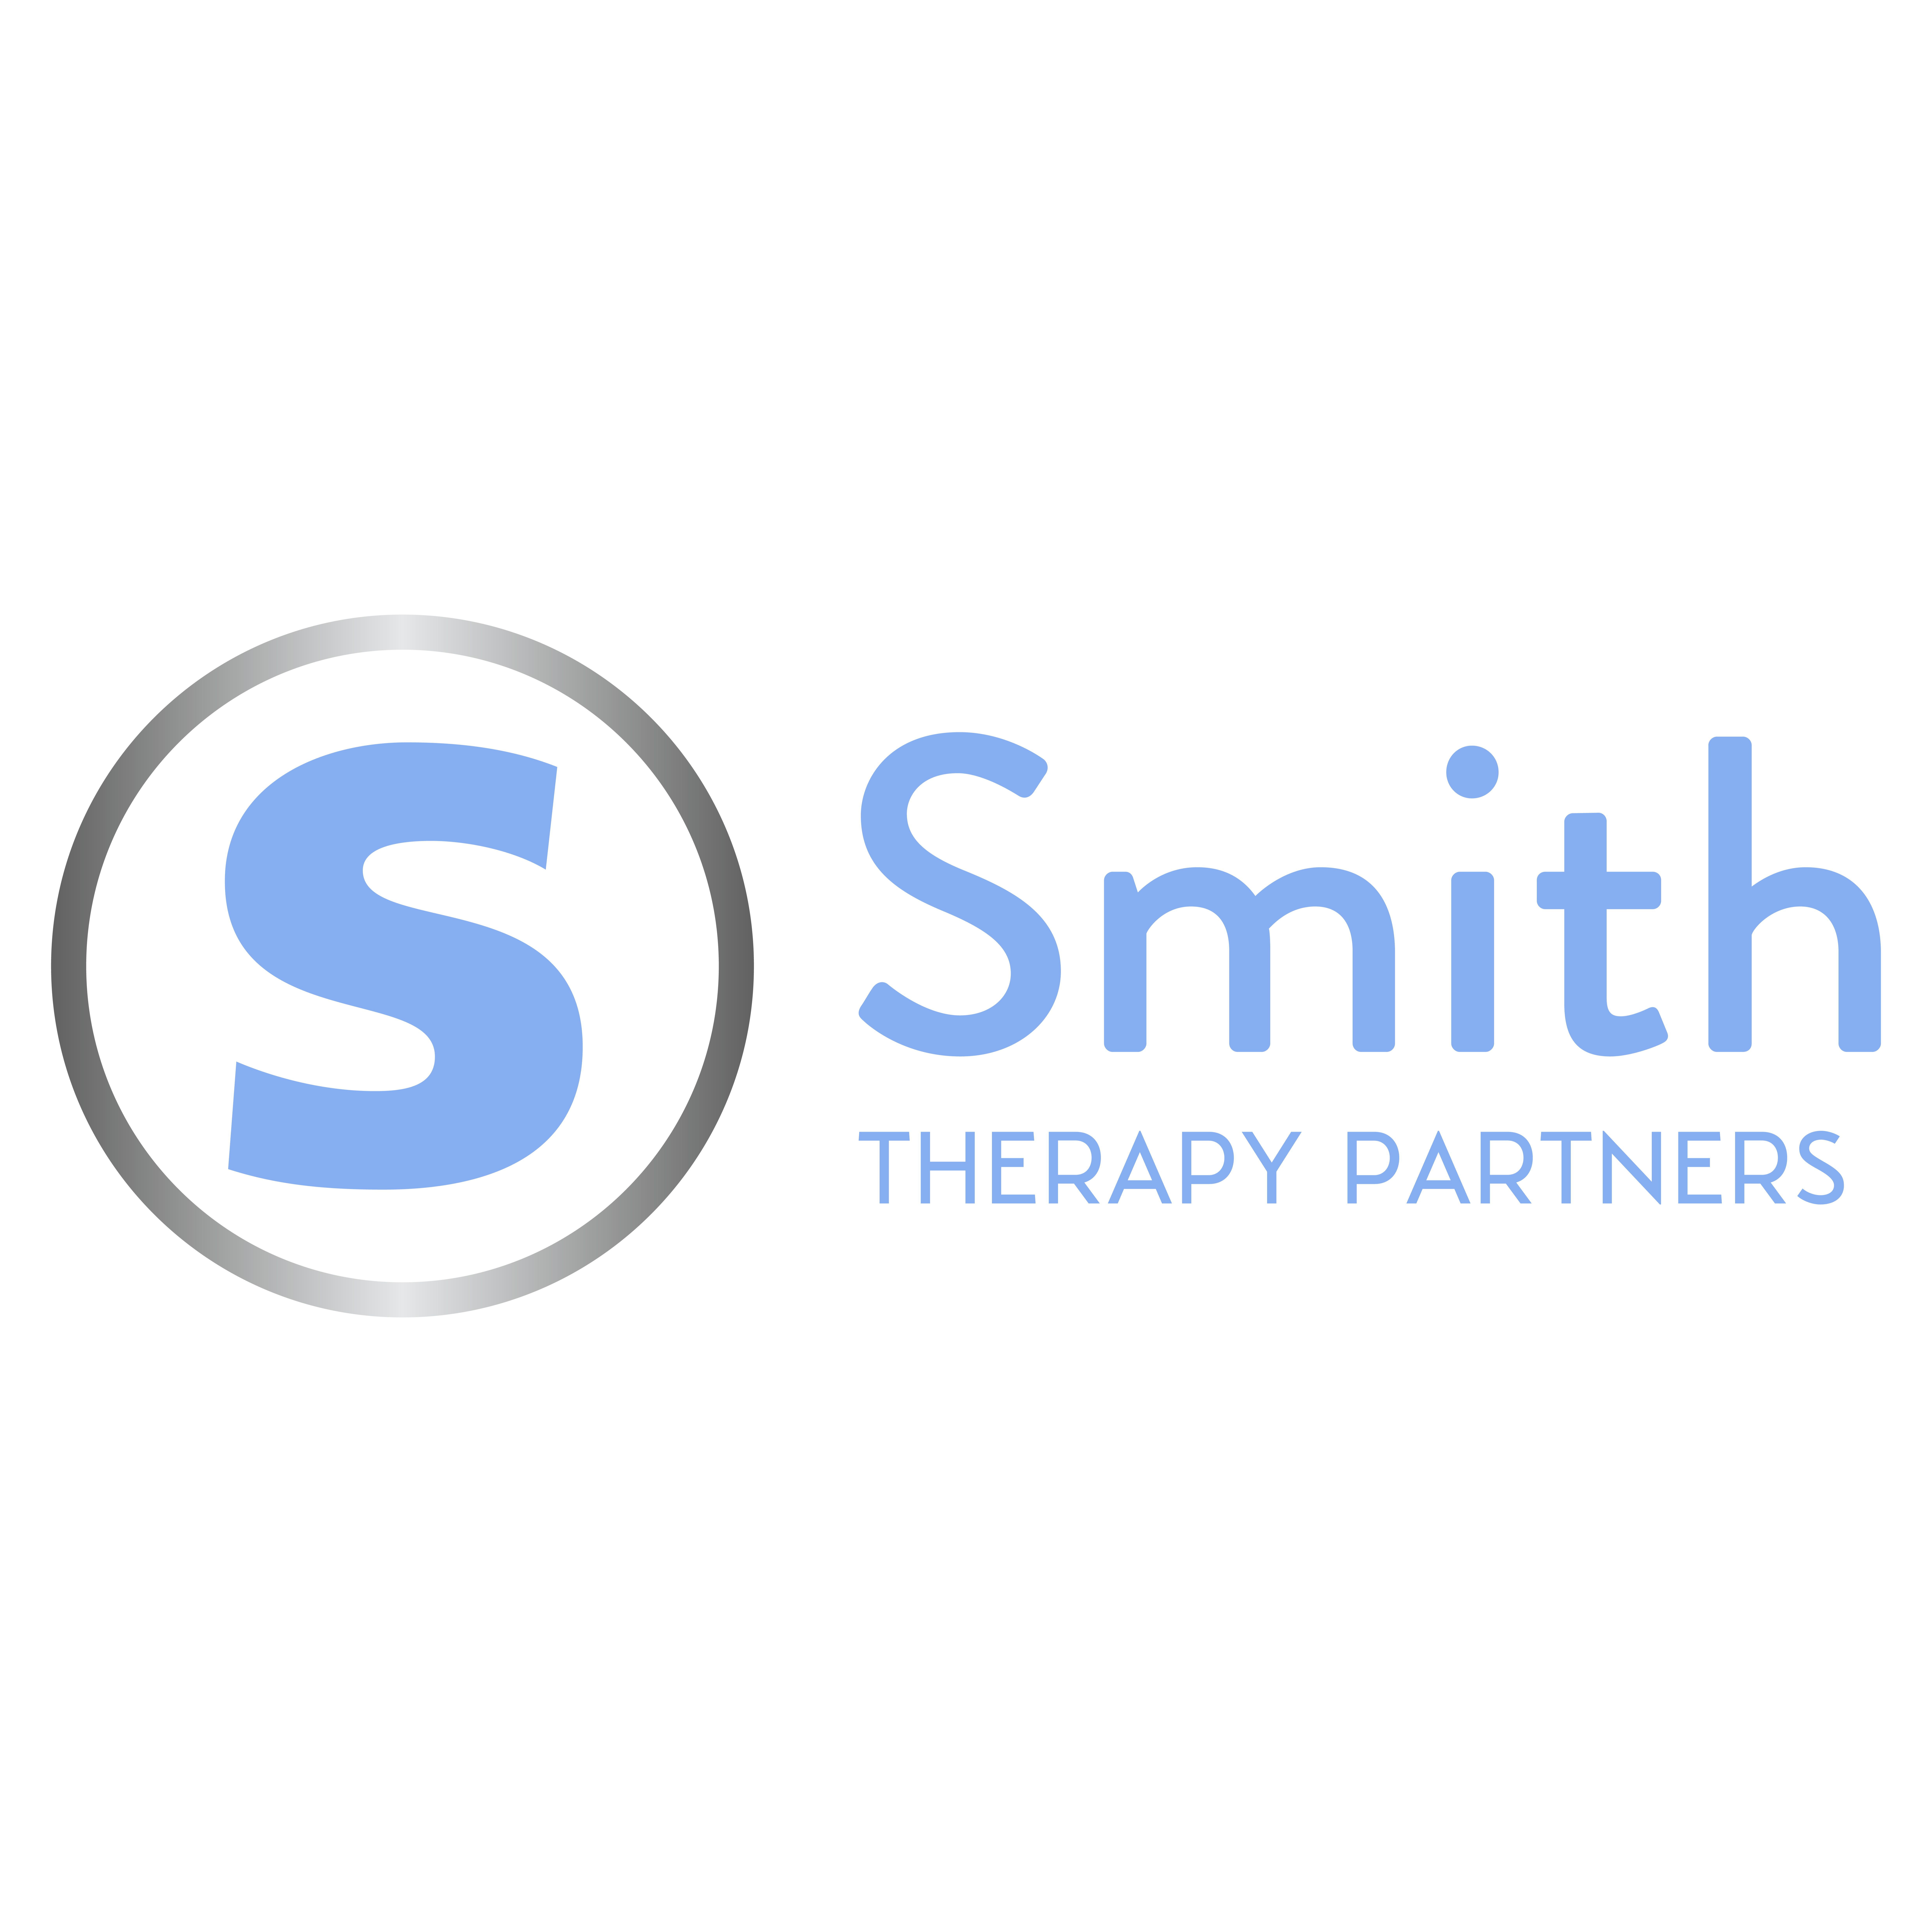 Smith Therapy Partners- Nellis - Las Vegas, NV 89110 - (725)726-7847 | ShowMeLocal.com